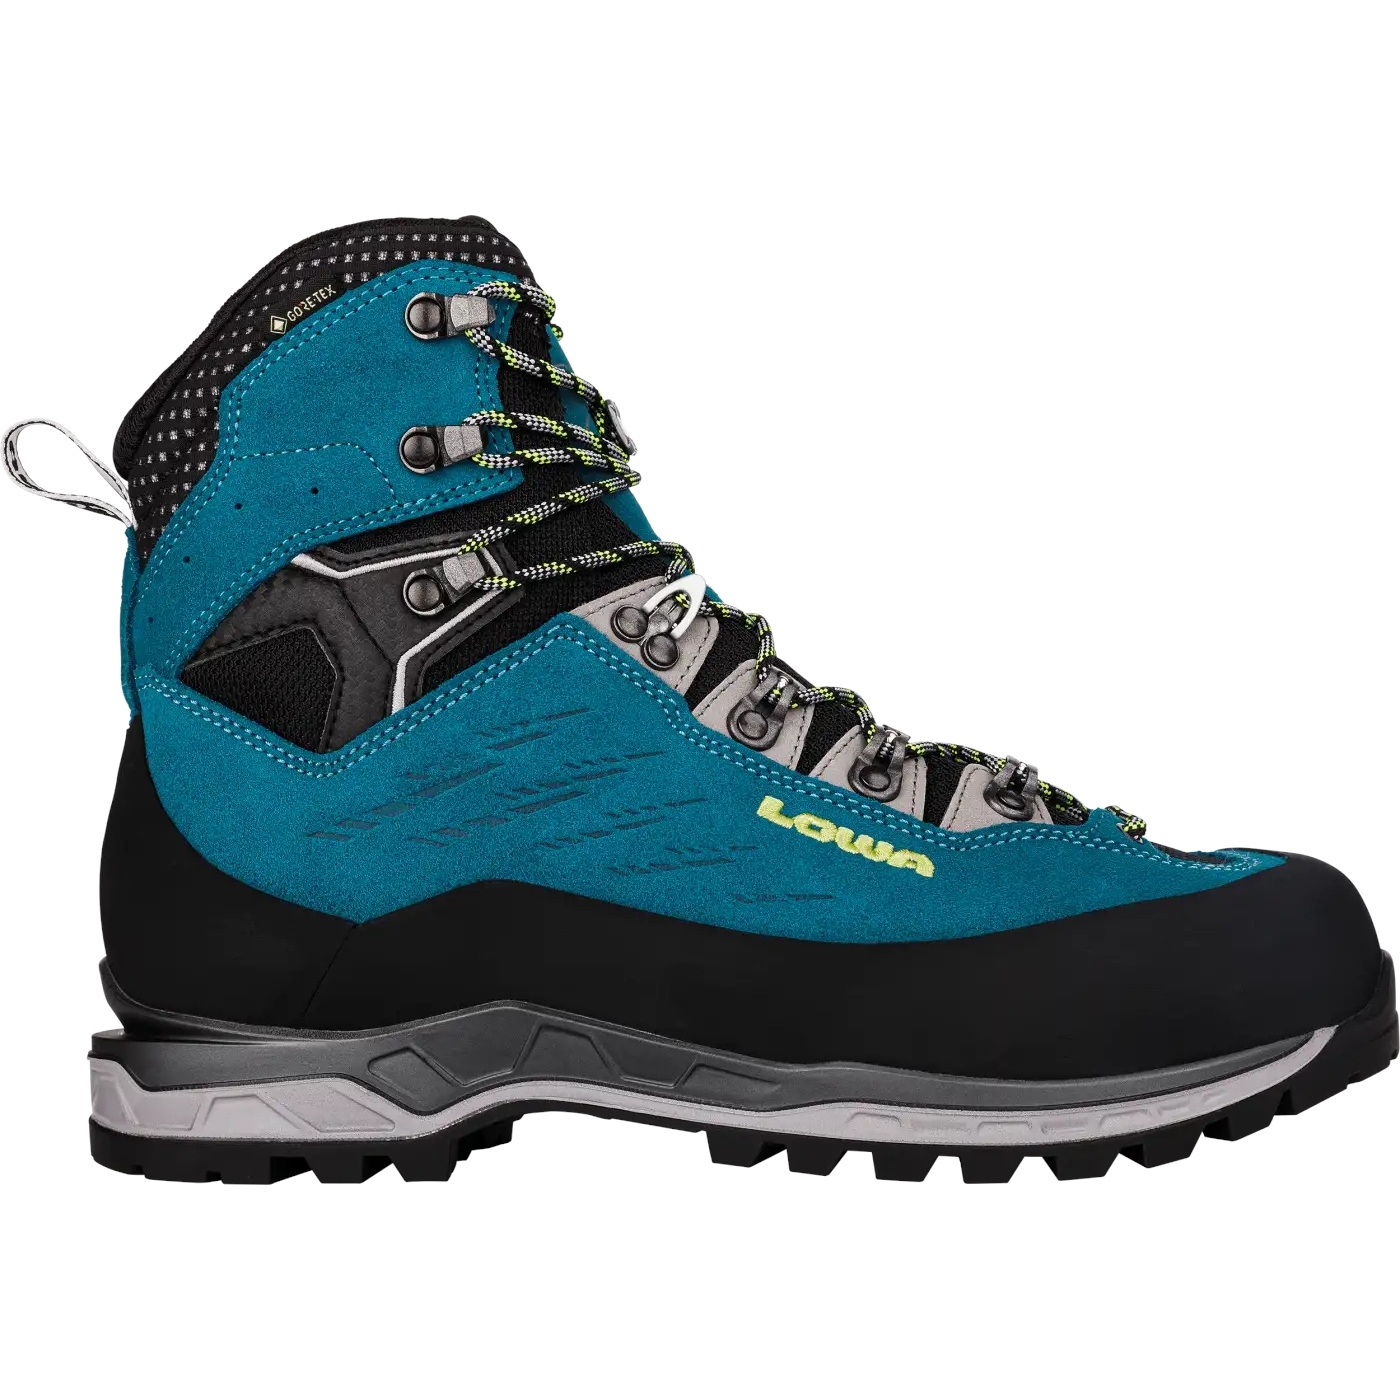 Image of LOWA Cevedale II GTX Mountaineering Shoes Men - turquoise/lime